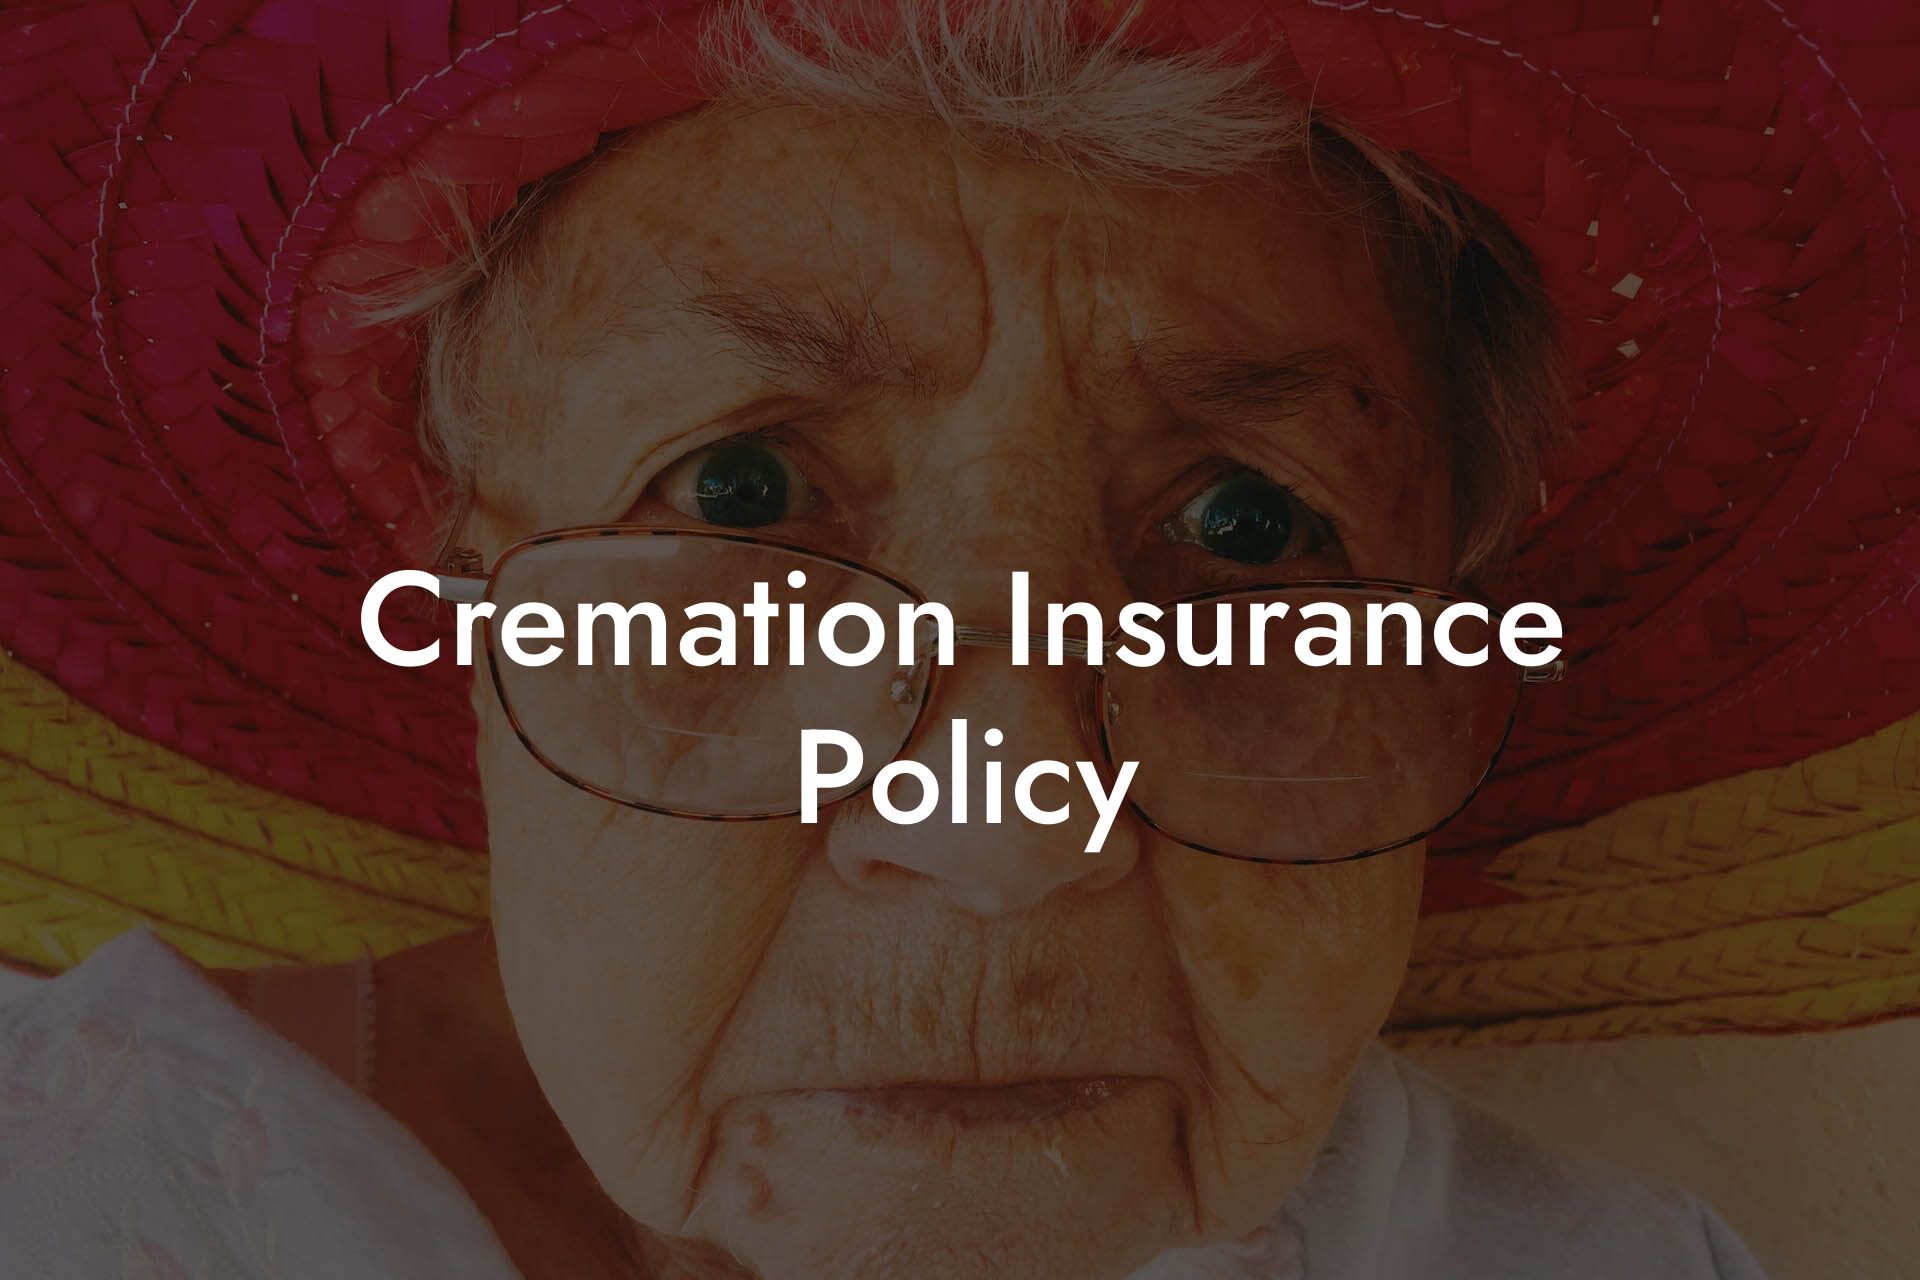 Cremation Insurance Policy